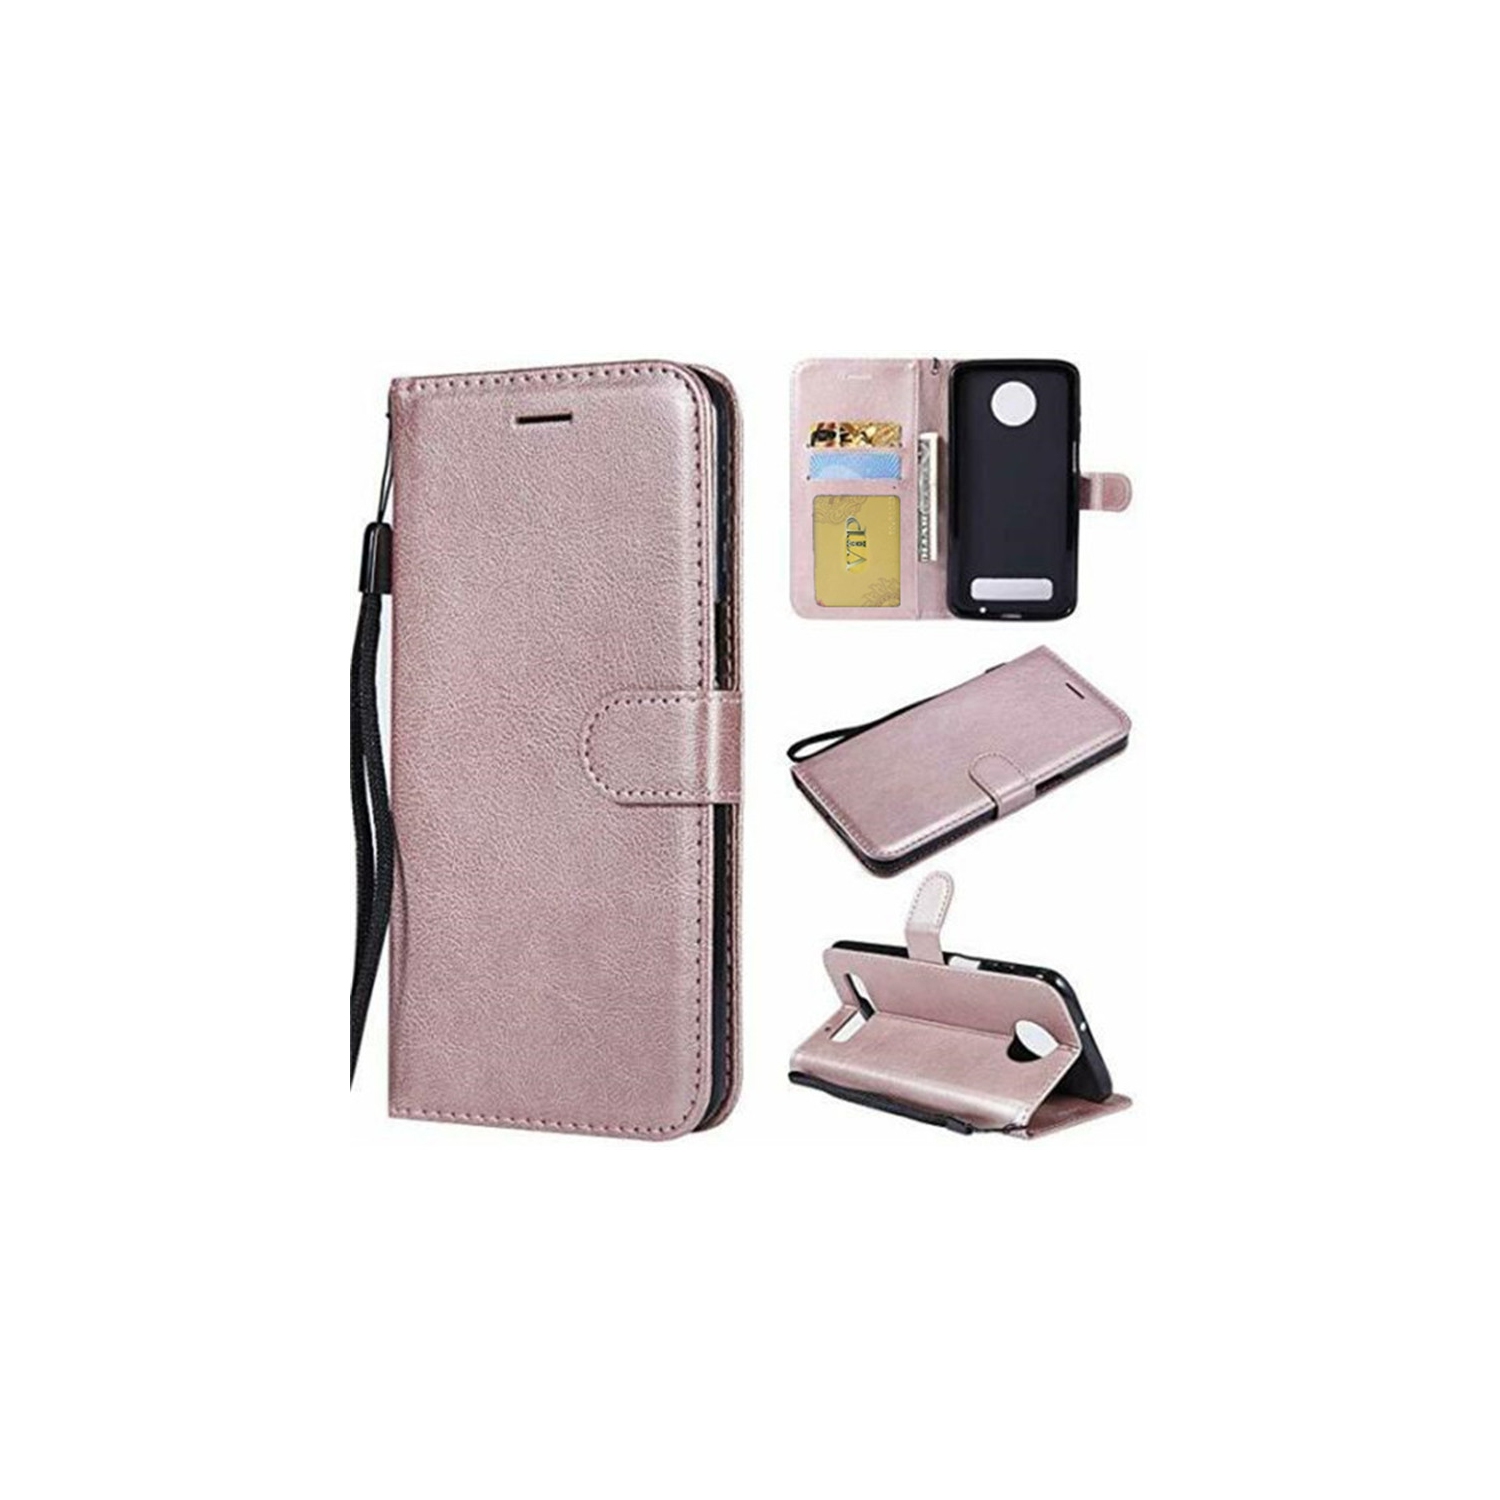 [CS] Motorola Moto Z3 Play Case, Magnetic Leather Folio Wallet Flip Case Cover with Card Slot, Rose Gold